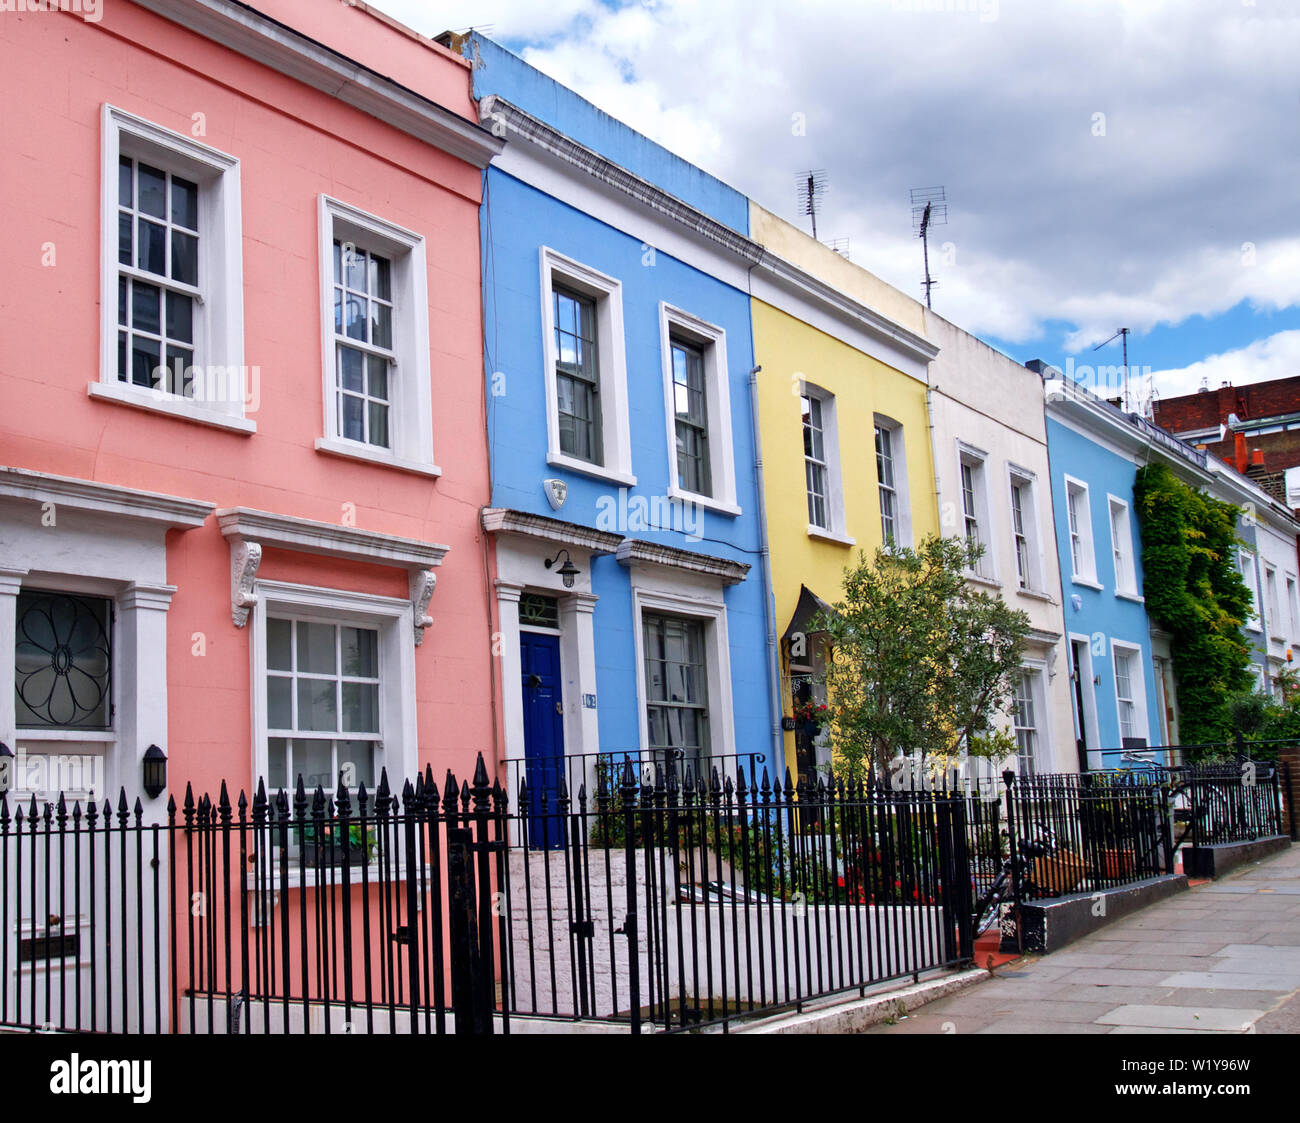 row of colourful houses, Notting Hill, London Stock Photo